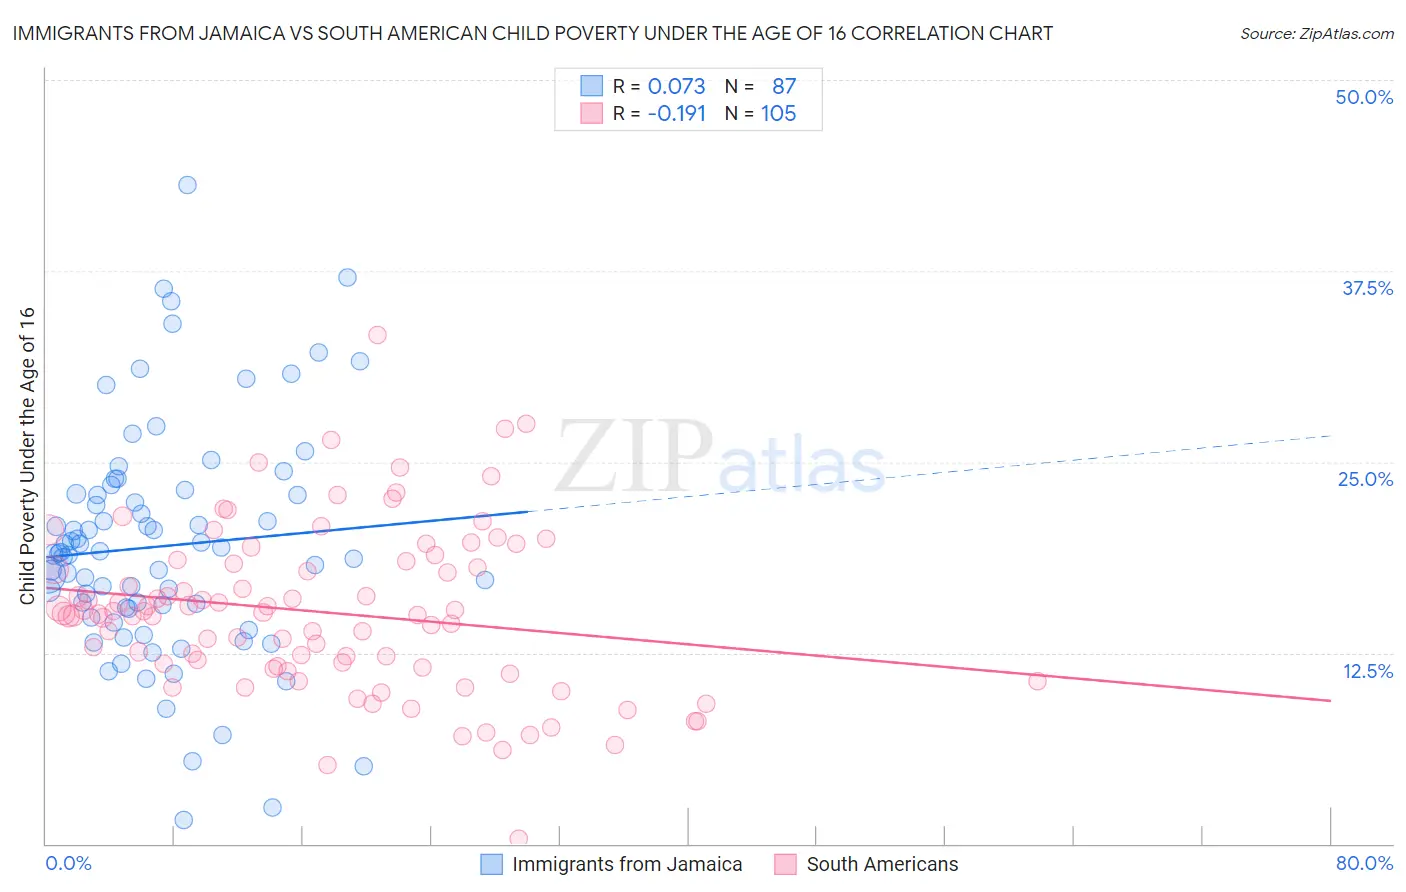 Immigrants from Jamaica vs South American Child Poverty Under the Age of 16